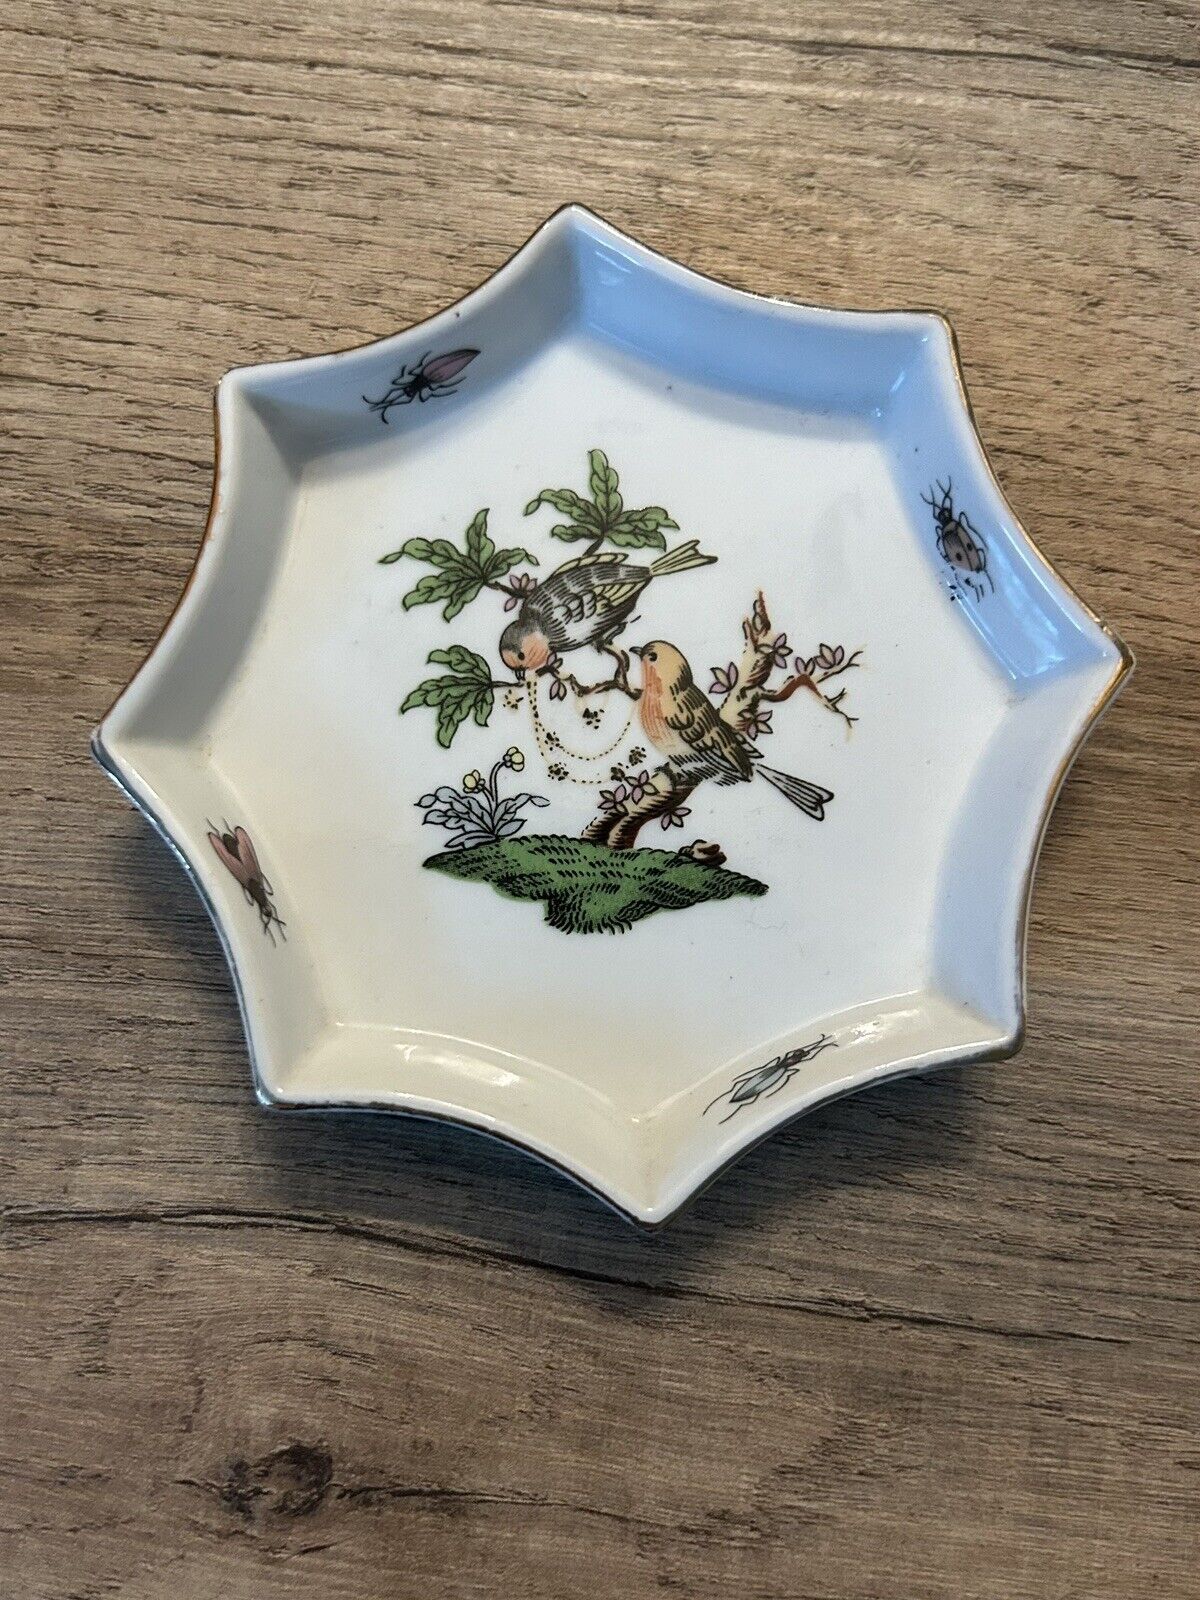 Vintage Octagonal Bird and Insect Trinket Dish